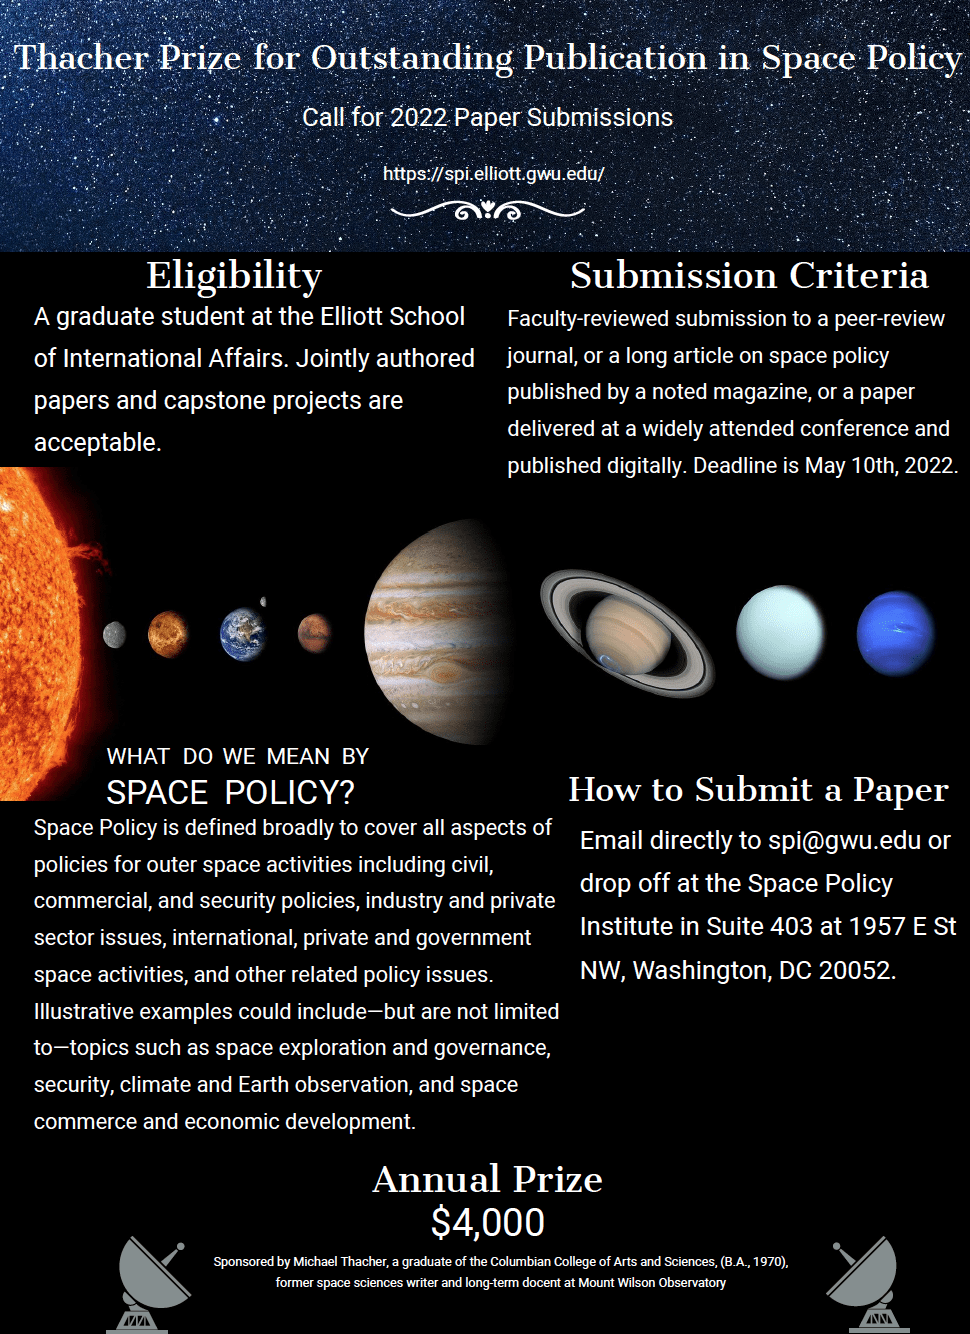 Image announcing Thacher Prize for Outstanding Publication in Space Policy